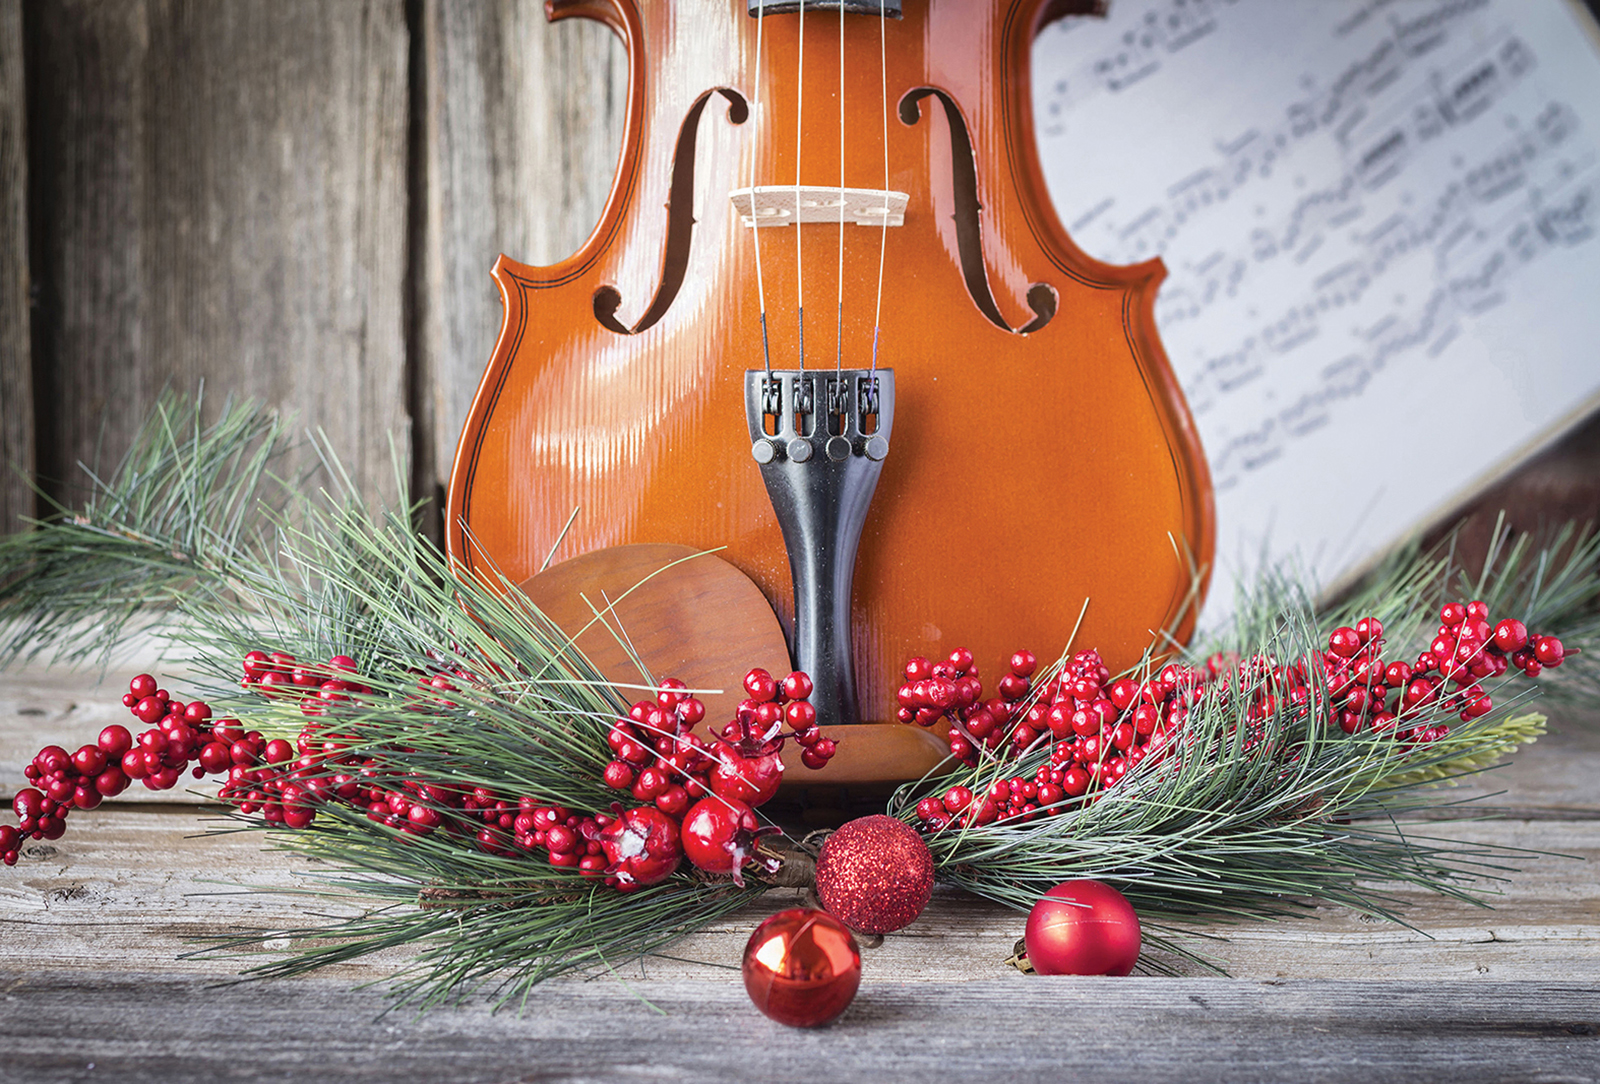 highlands nc holiday music highlands cashiers chamber music